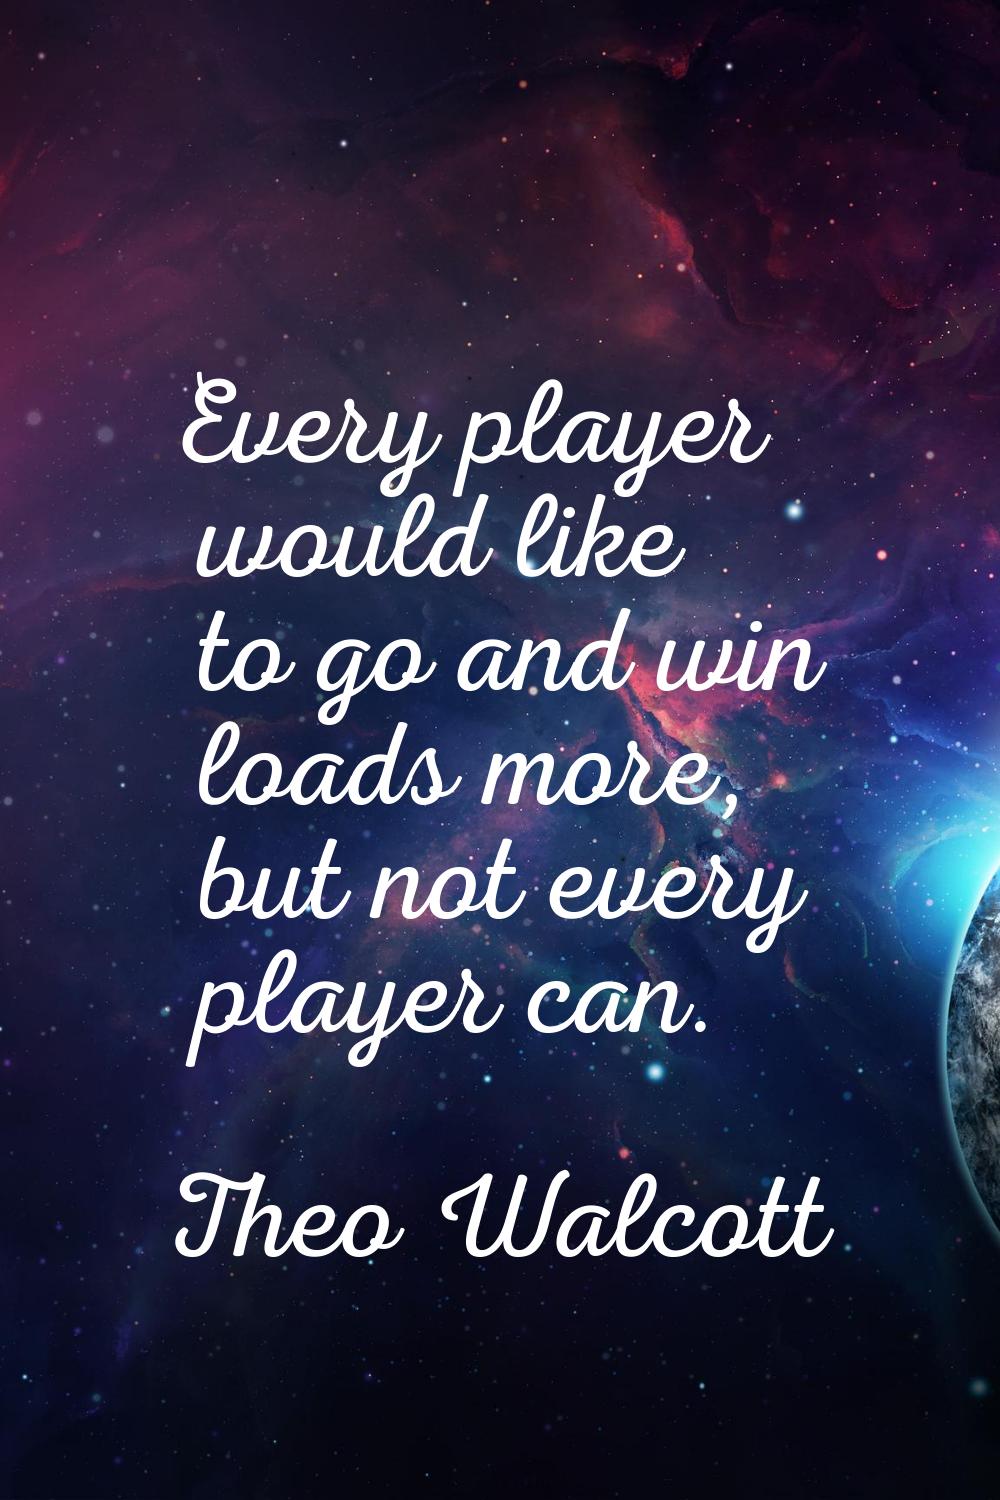 Every player would like to go and win loads more, but not every player can.